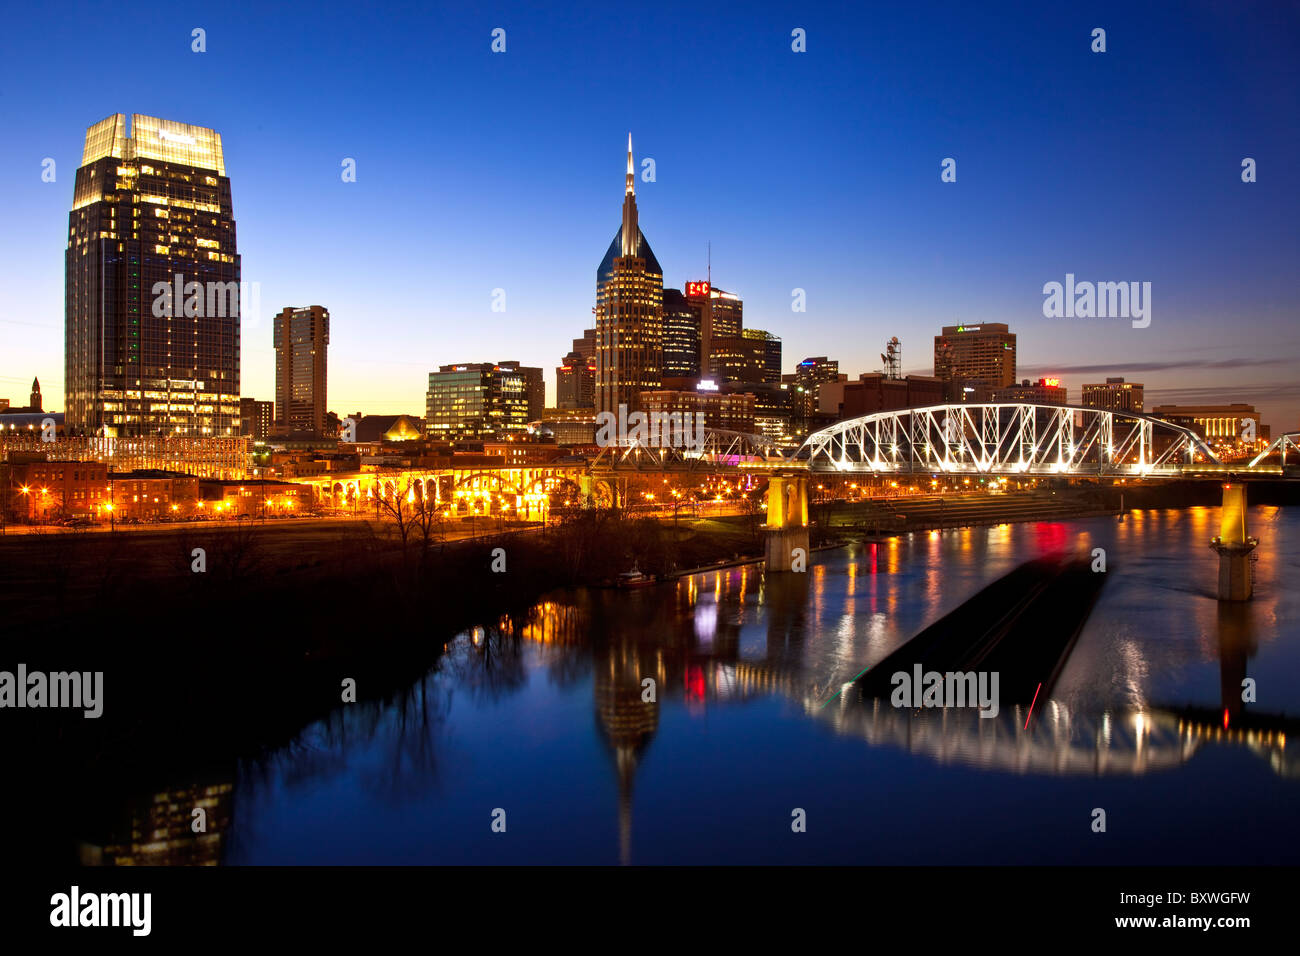 Coal Barge transiting the Cumberland River at twilight through Nashville Tennessee, USA Stock Photo